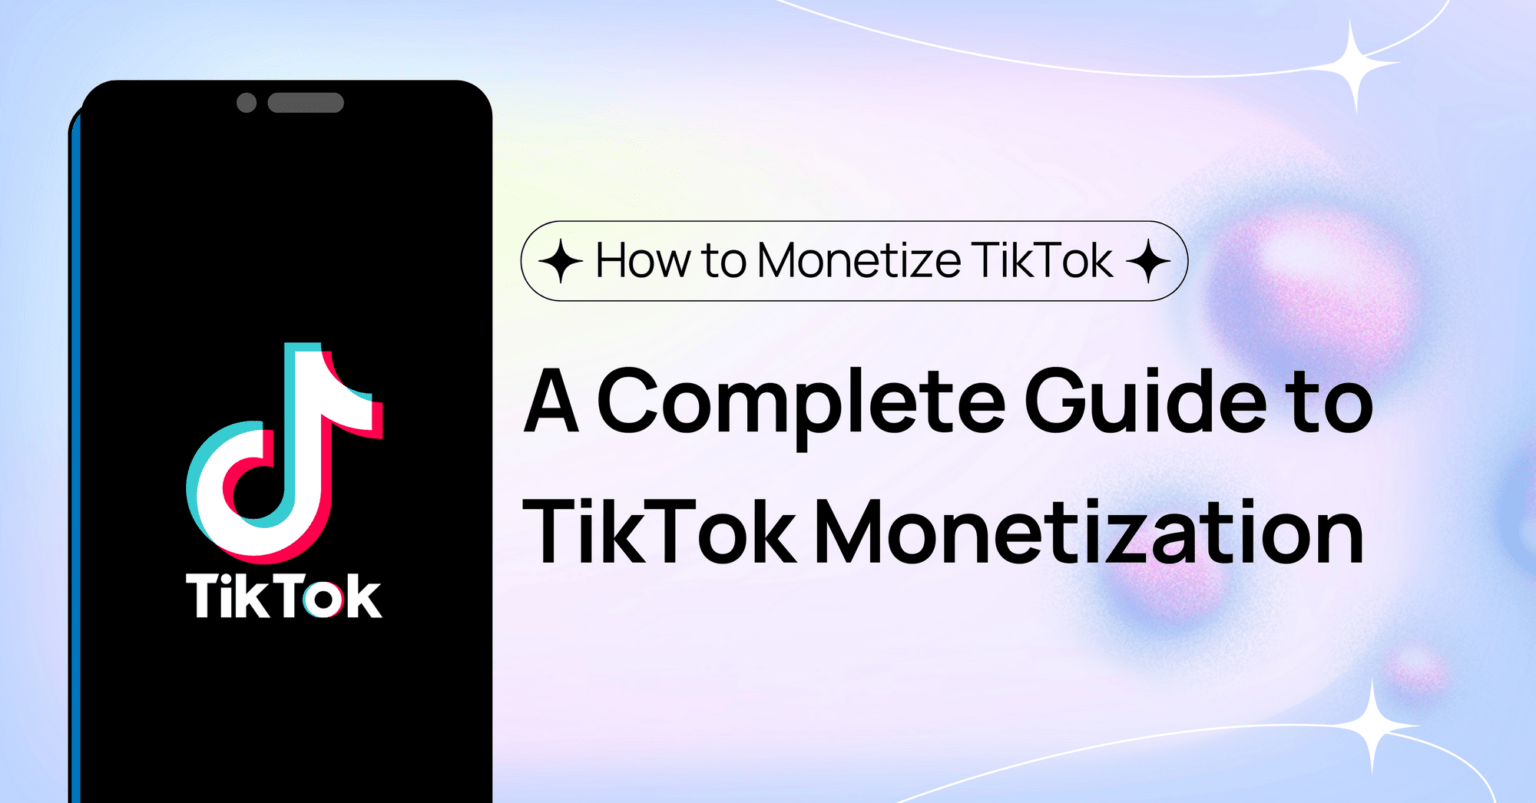 the requirements for TikTok monetization